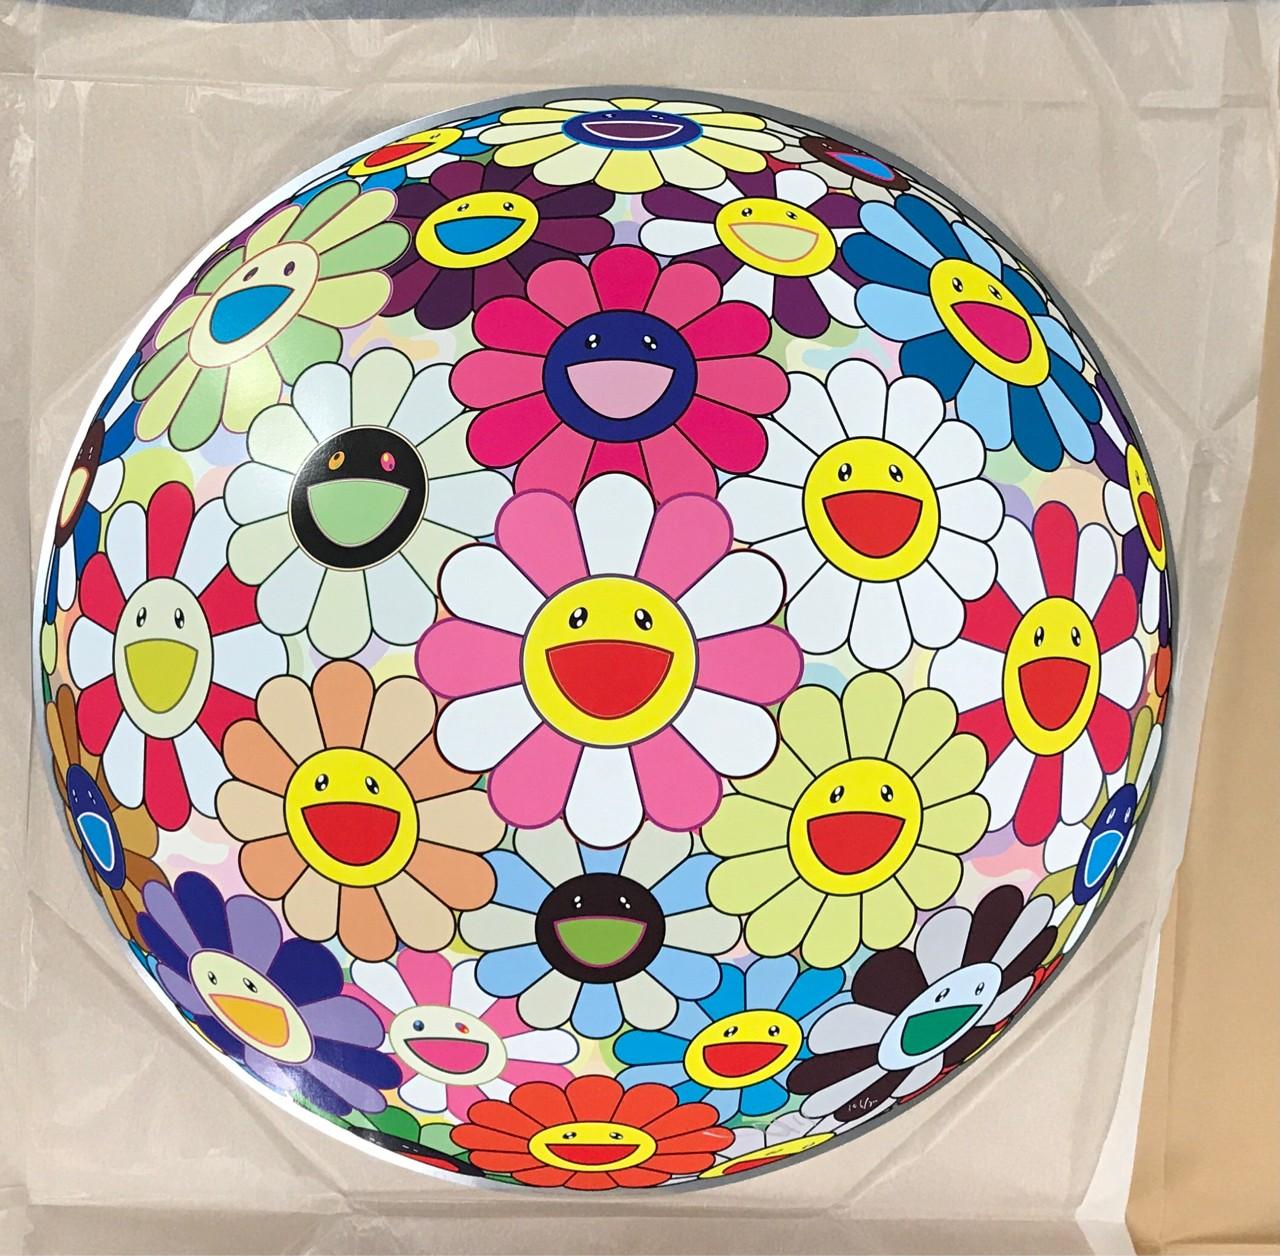 Flowerball Pink. Limited Edition (print) by Murakami signed, numbered - Print by Takashi Murakami